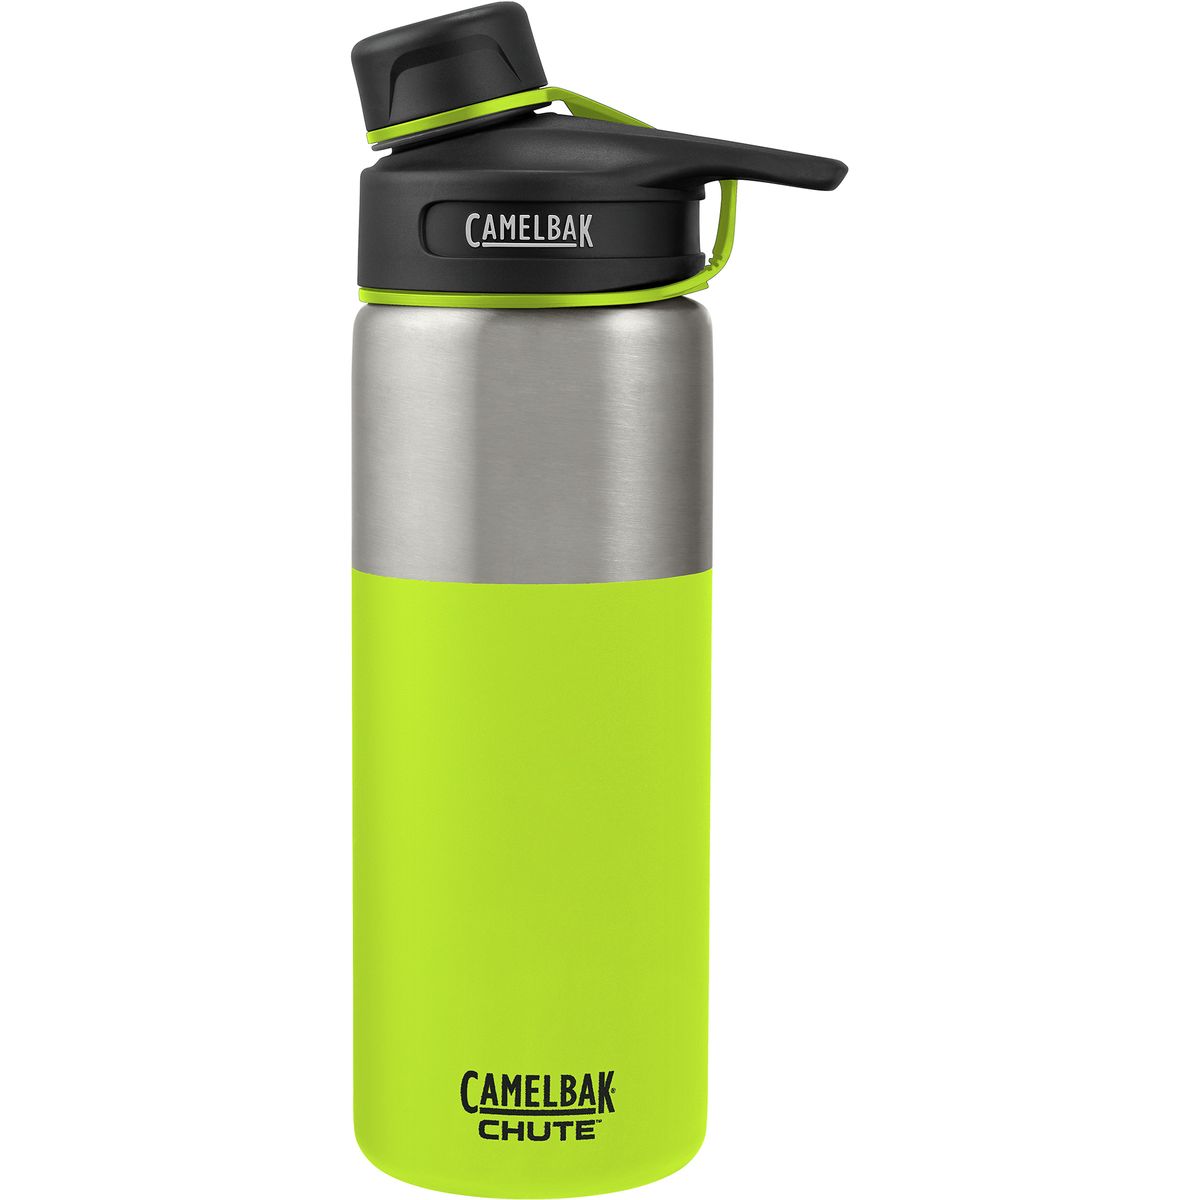 CamelBak Chute Stainless Vacuum Insulated 6L Water Bottle